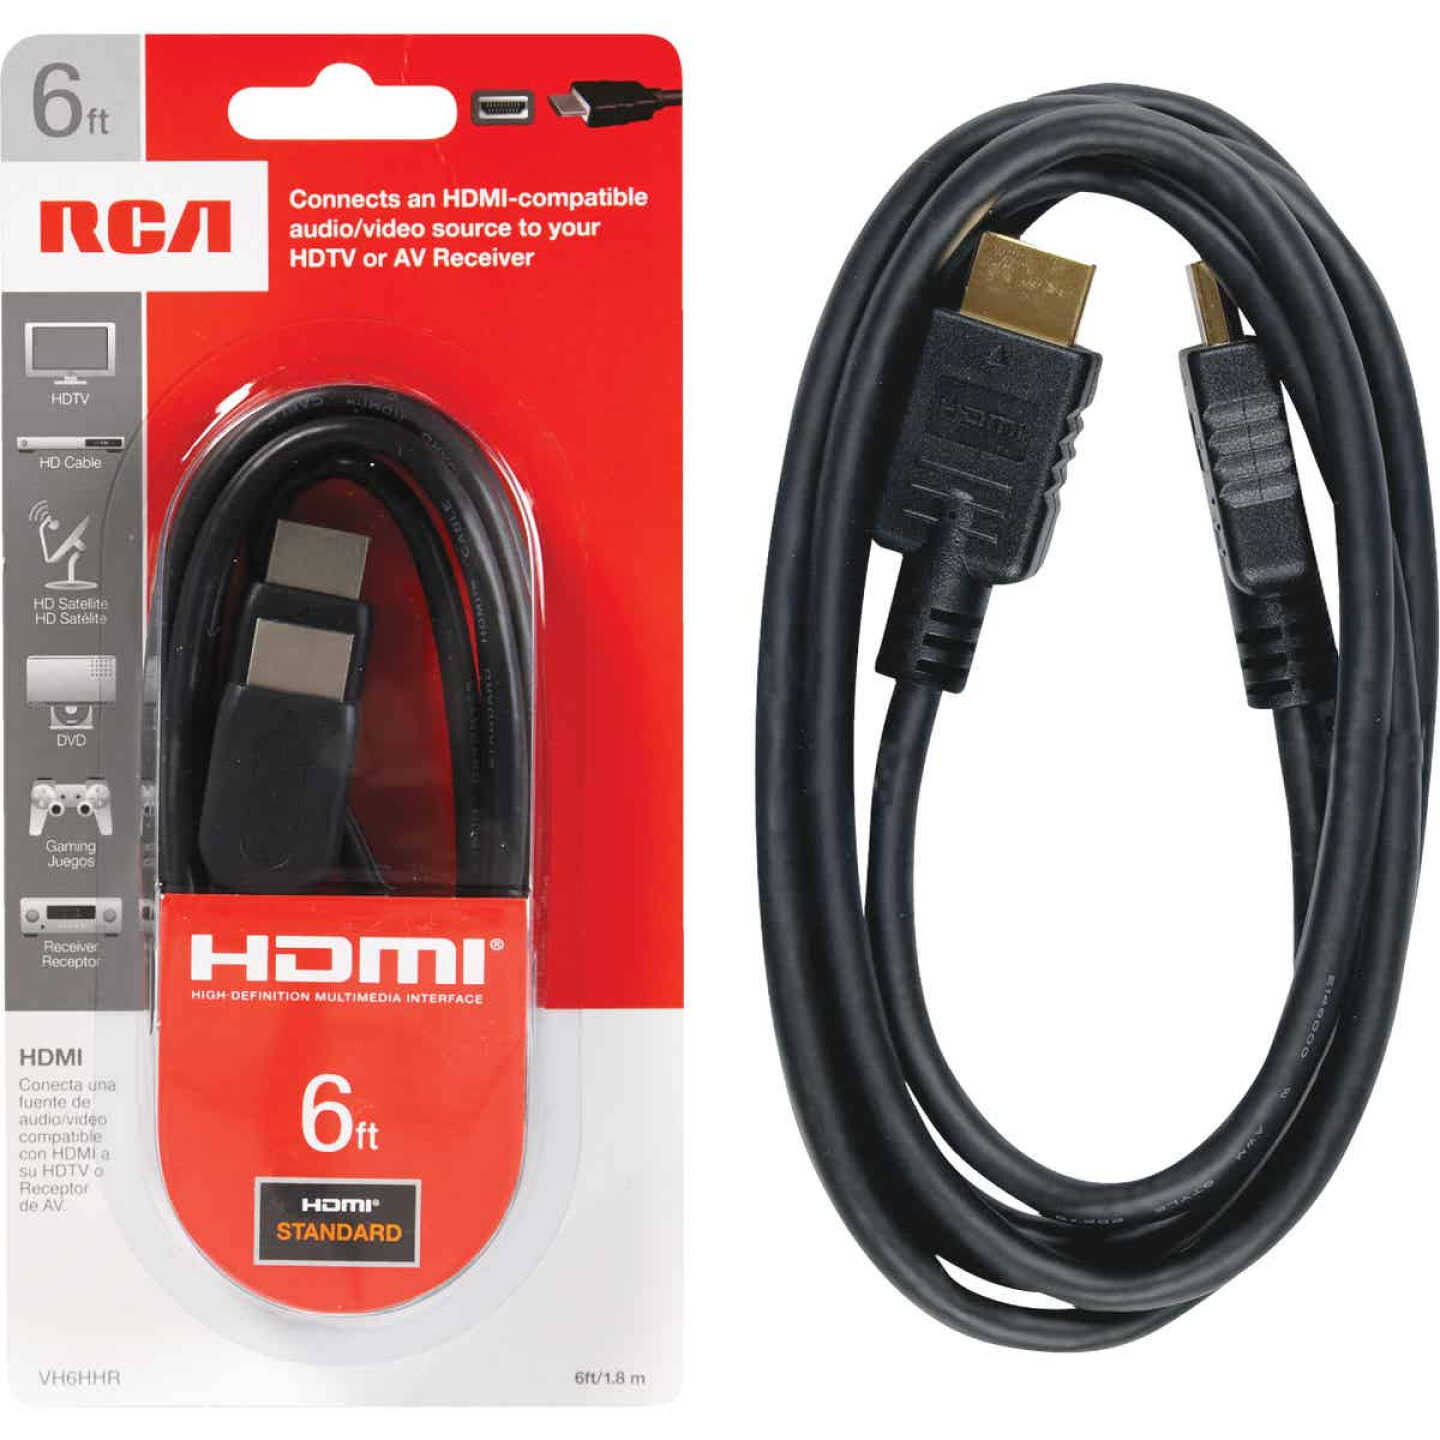 RCA HDMI Video Converter - Black at Cables N More